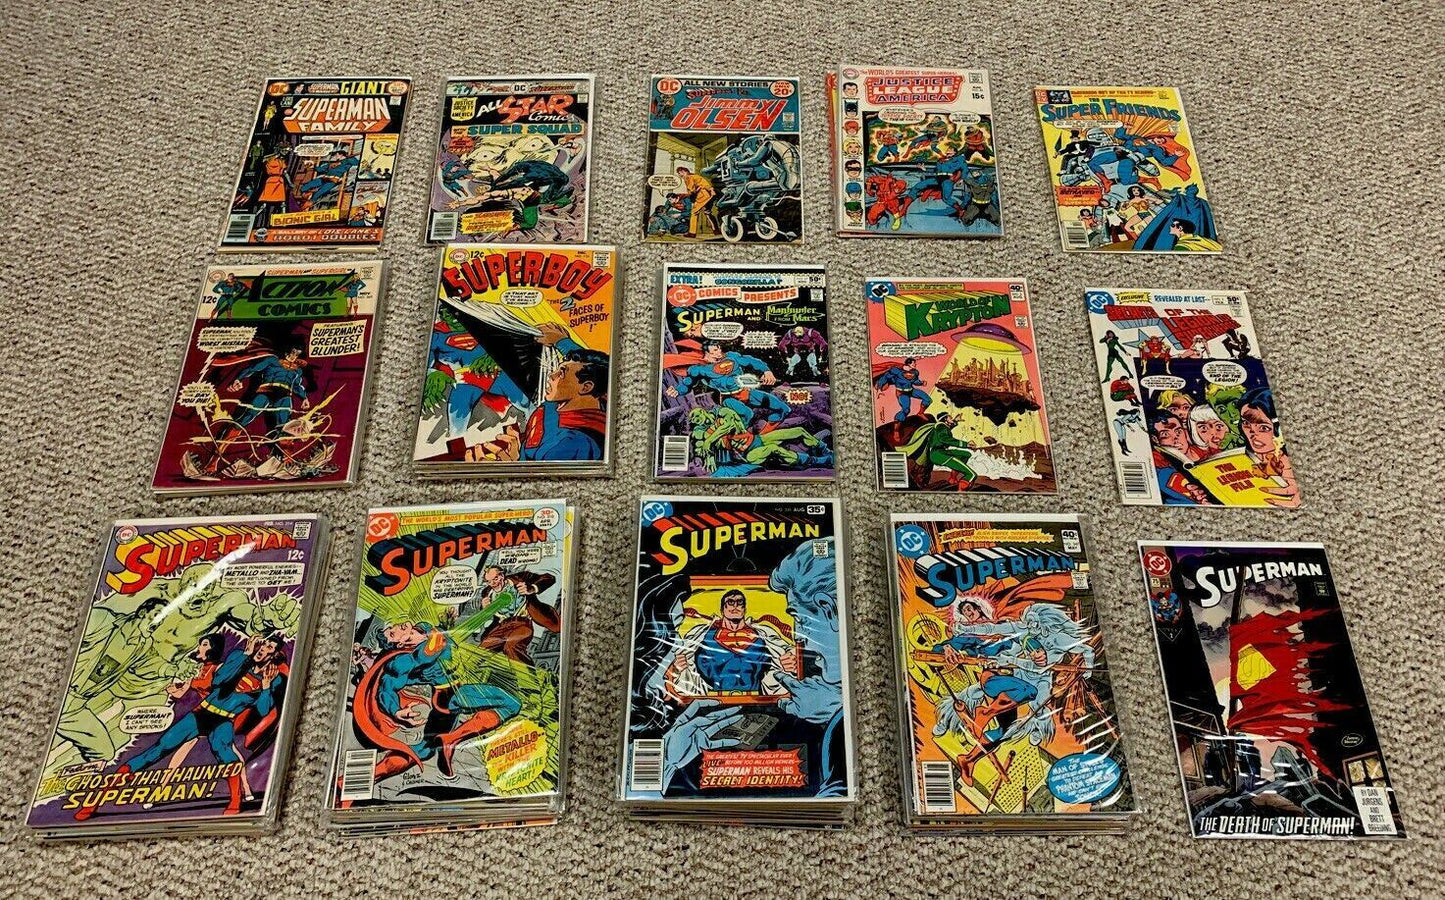 Superman 5 Comics Lot Dc Vf+ To Nm+ All Bagged And Boarded No Duplicates